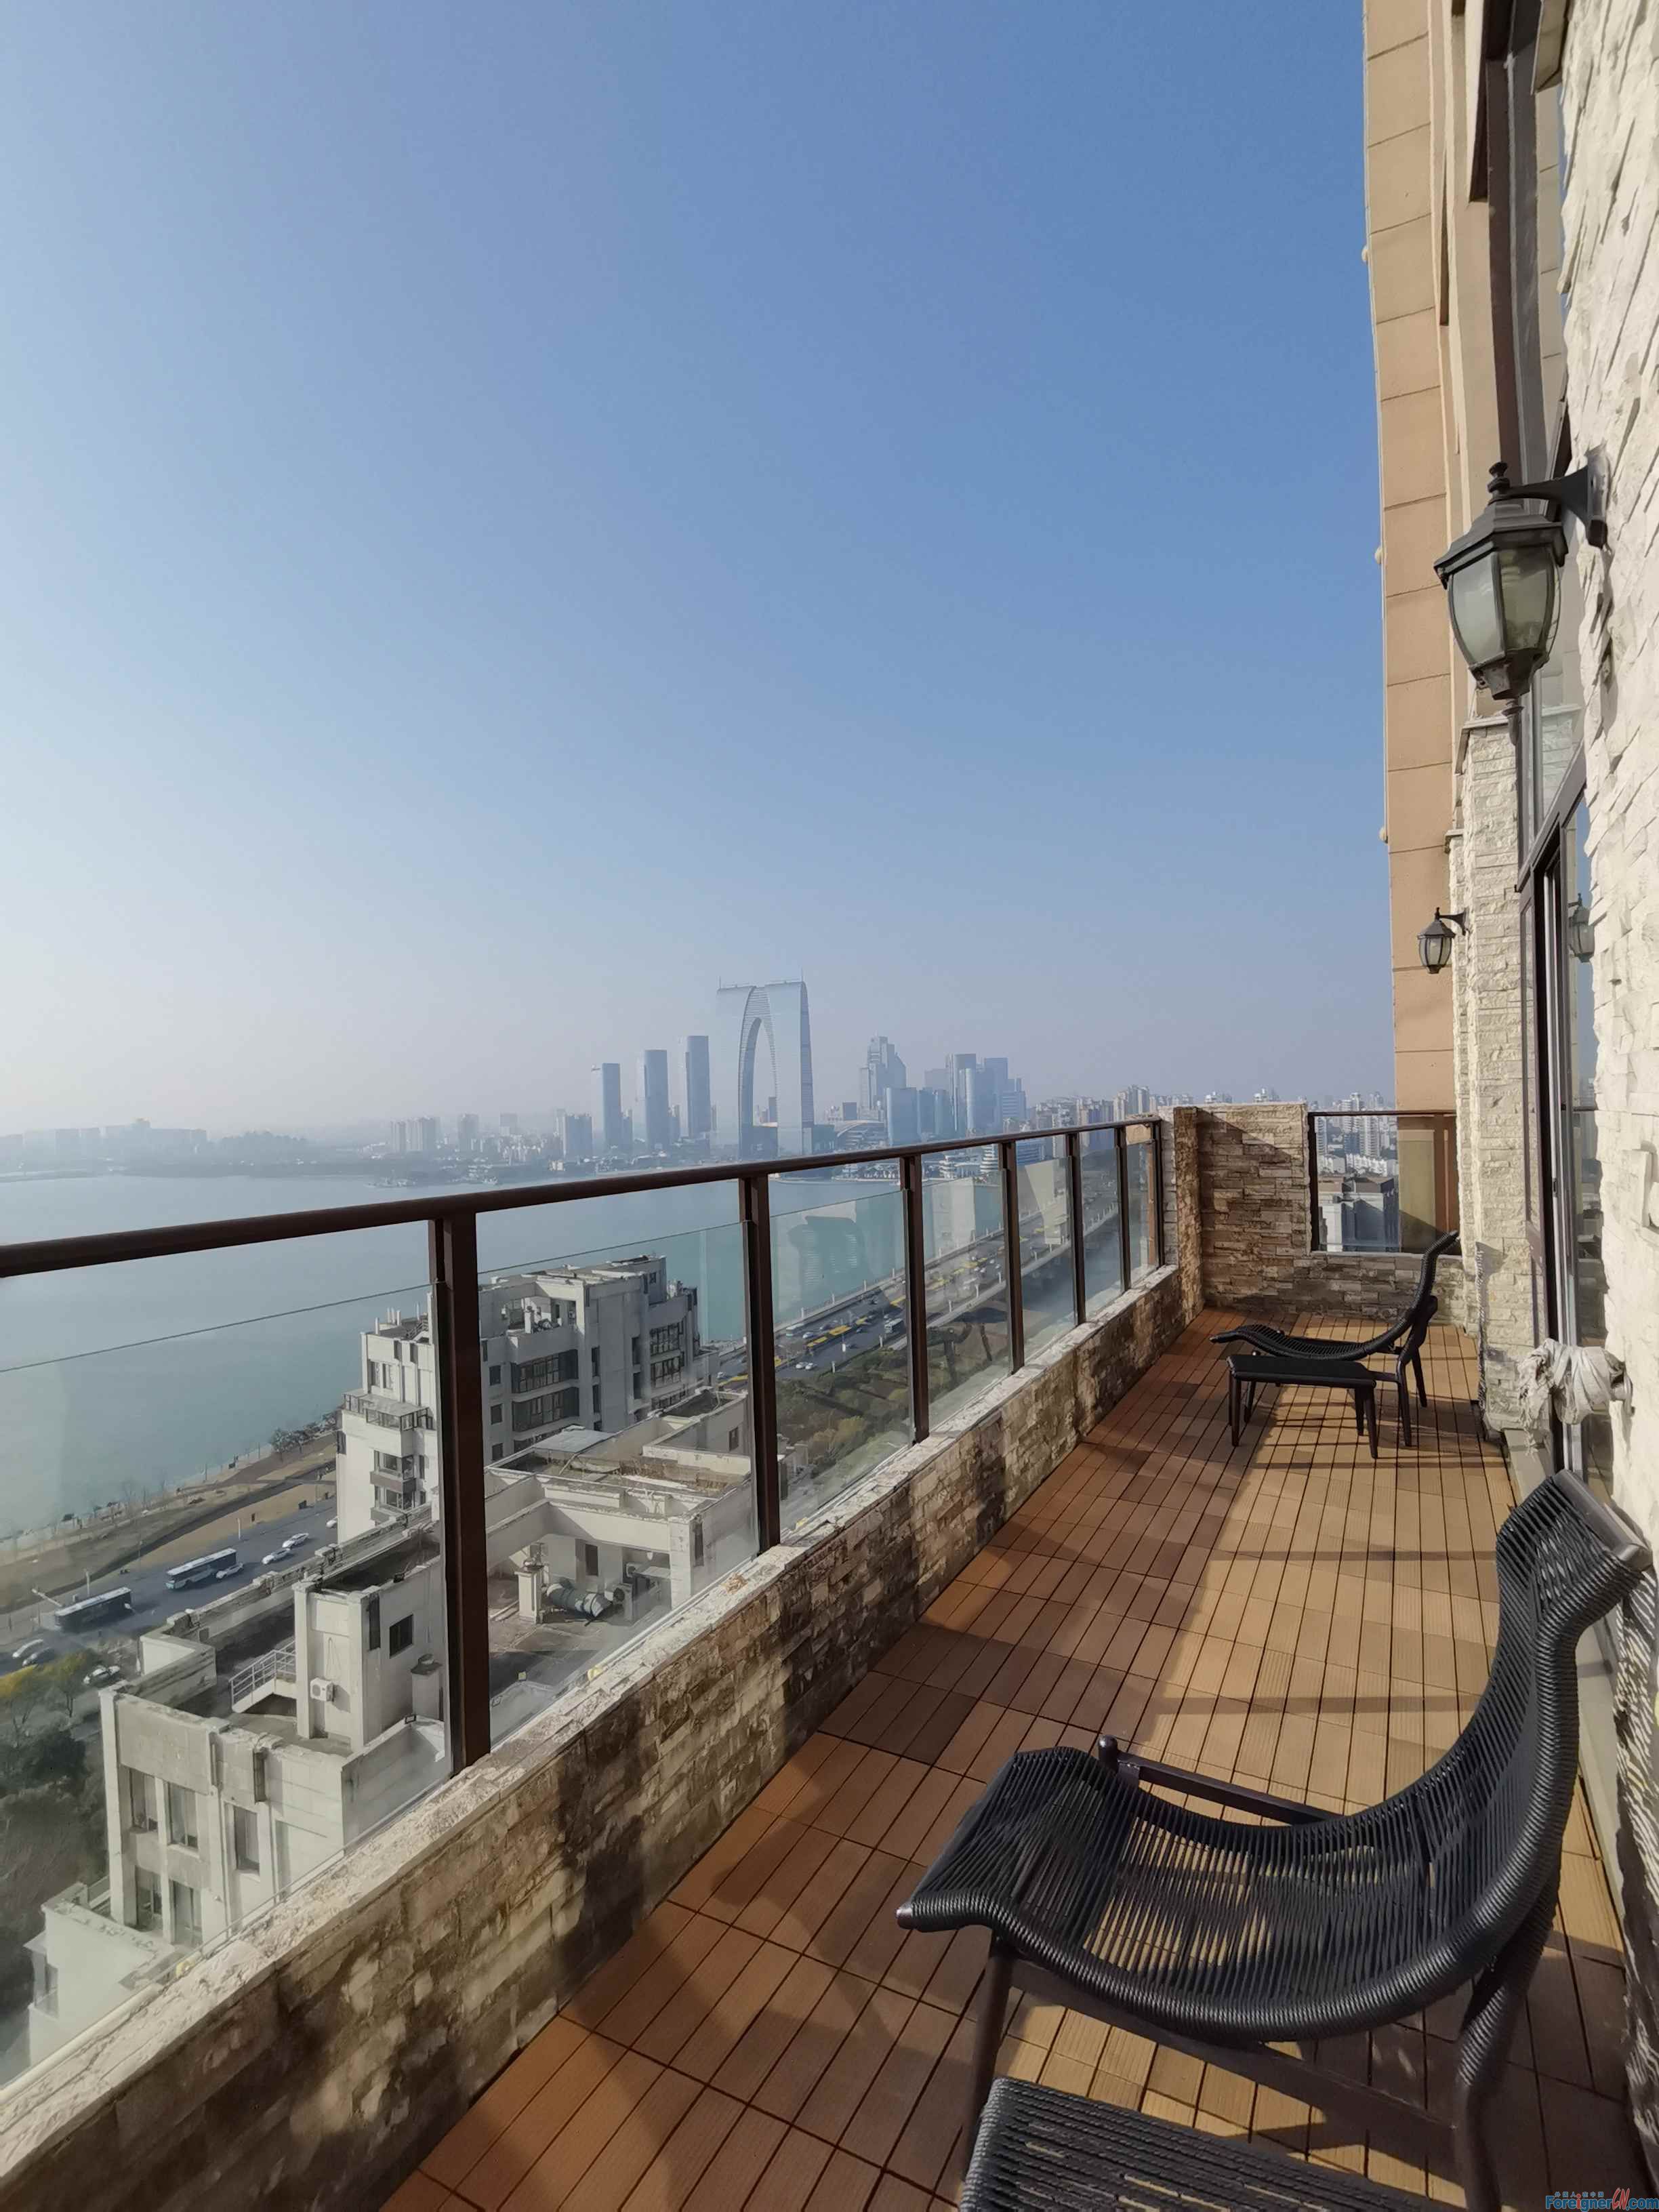 Open balcony | Super Lakeview /Bayside Garden -- 3 rooms and 1 baths /heating and central A/C; exclusive house /Close to Jinji Lake, Suzhou expo center and Times Square 